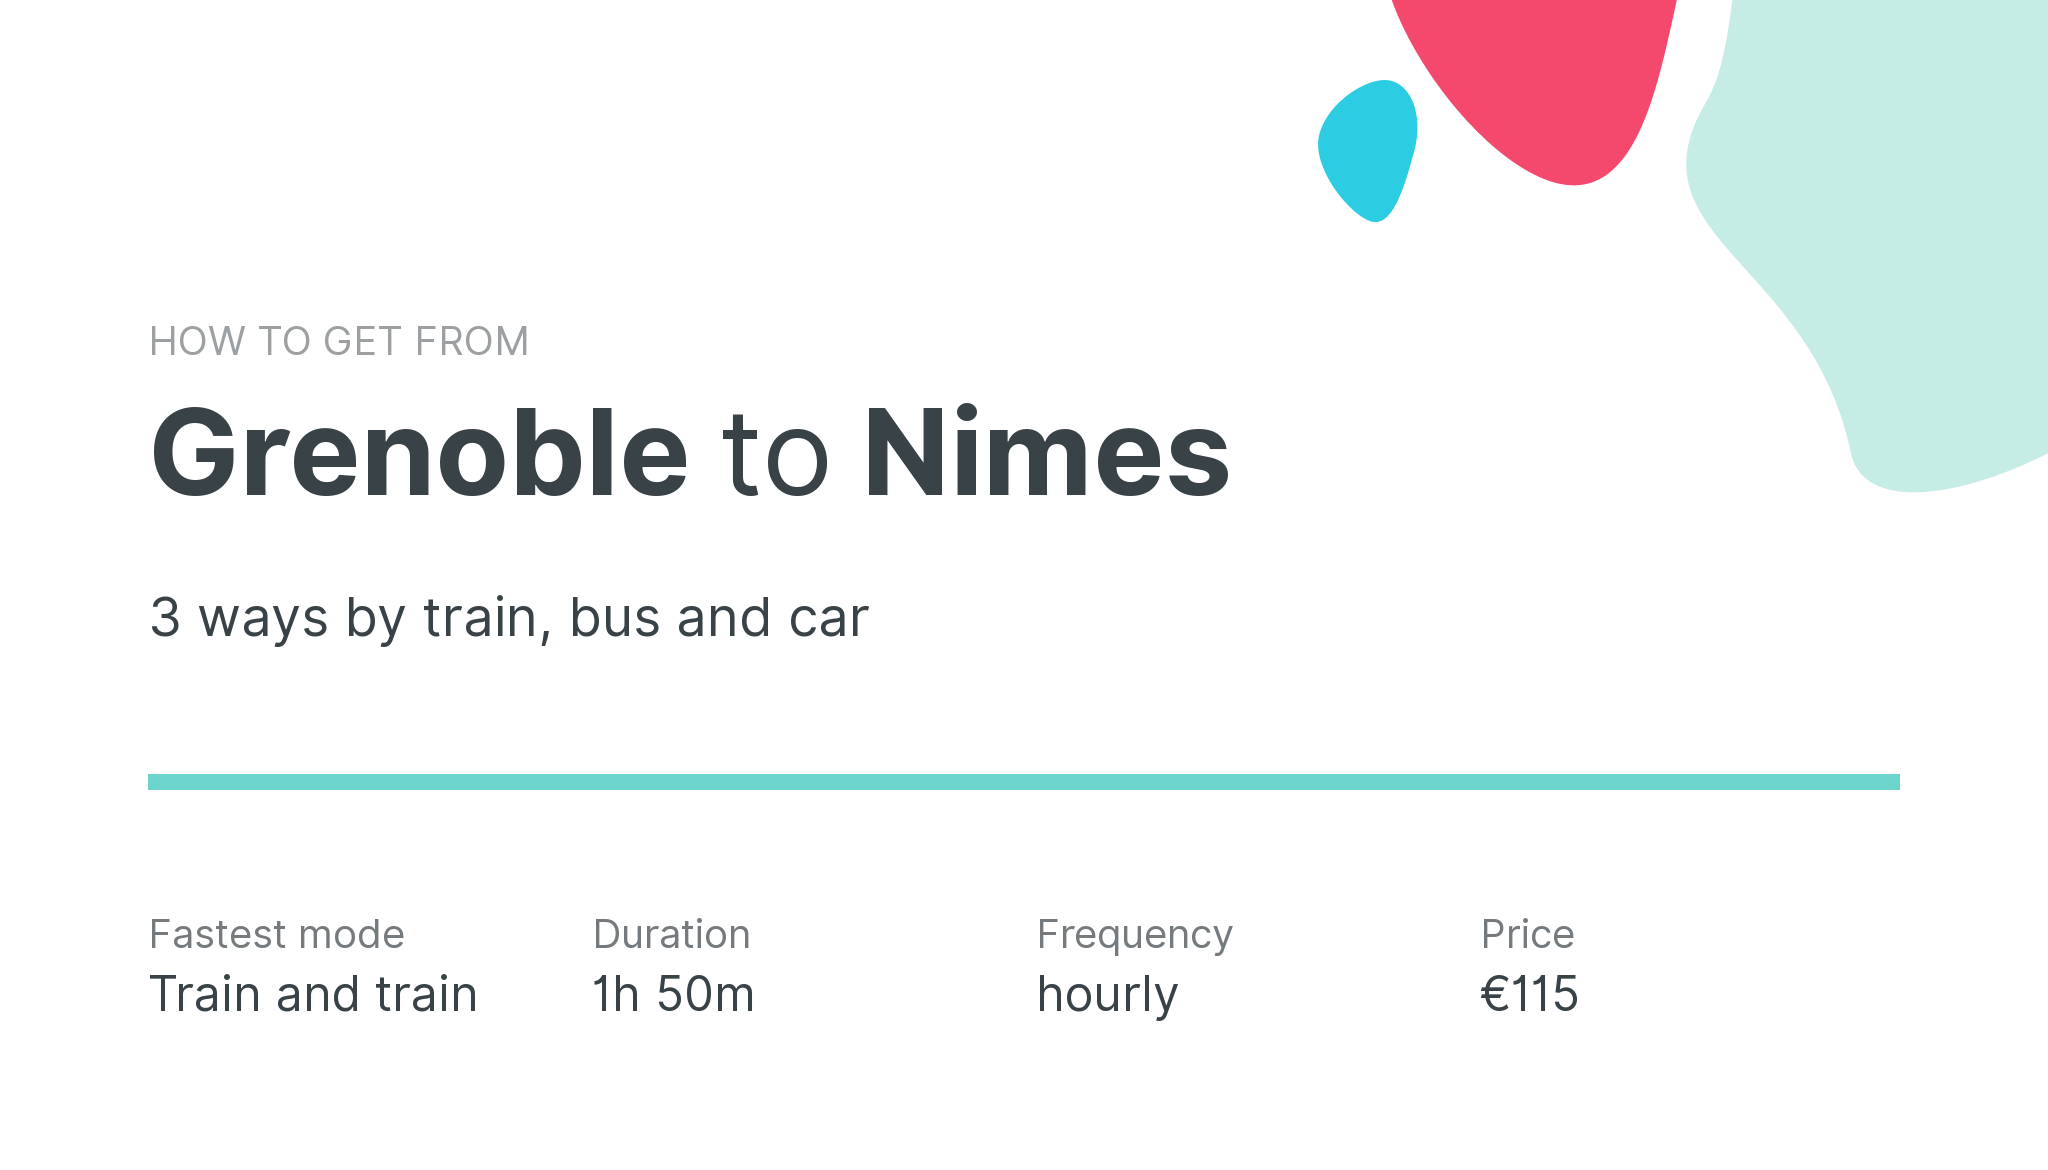 How do I get from Grenoble to Nimes